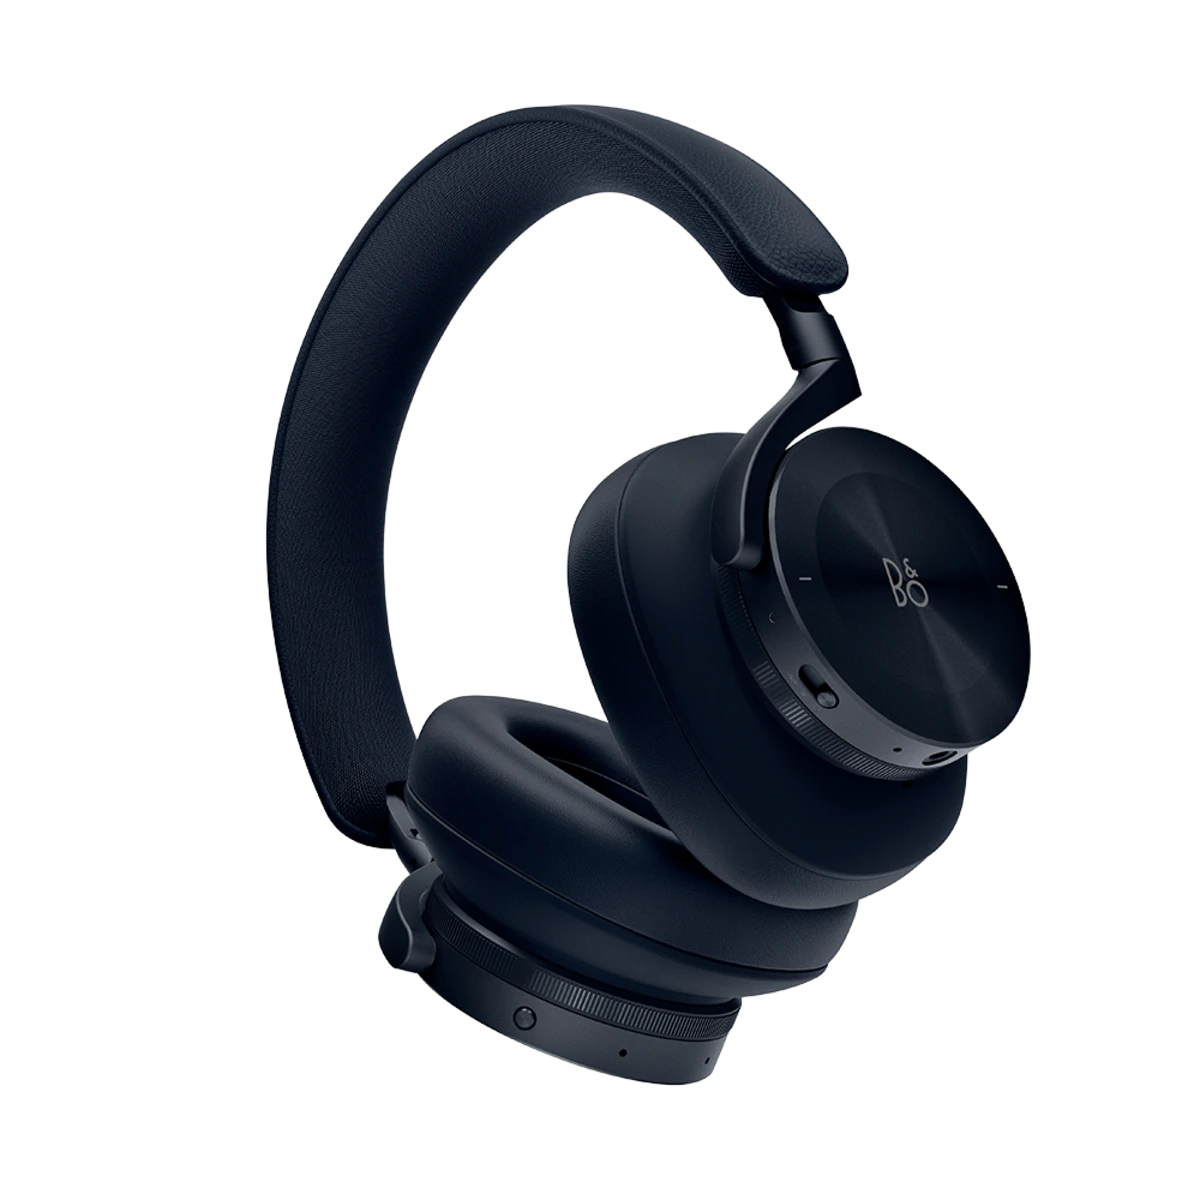 Beoplay H95 Premium Adaptive Noise Cancelling Headphones